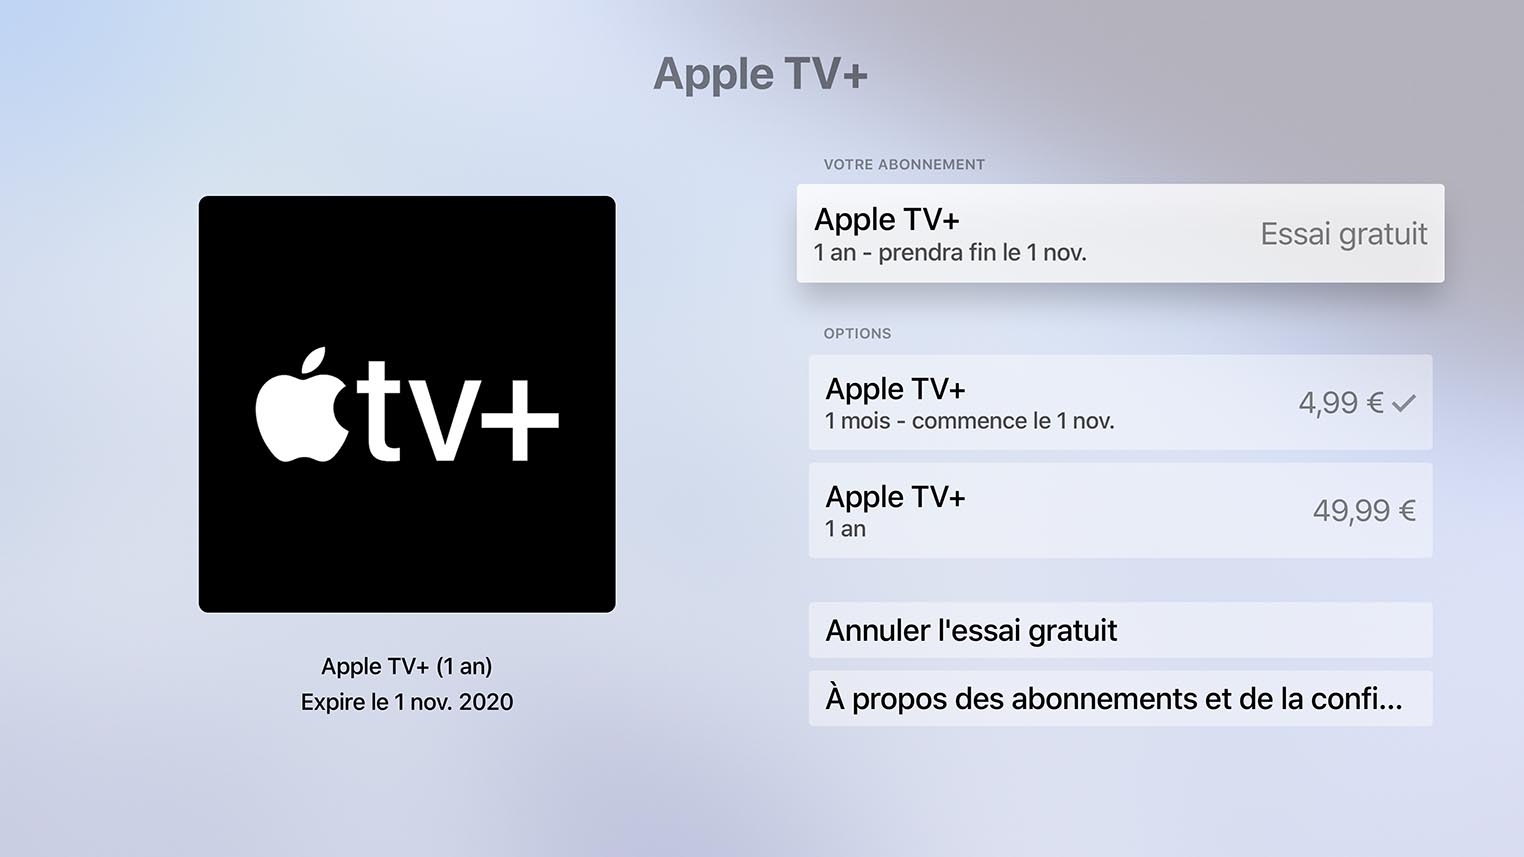 How to unsubscribe from Apple TV+? 